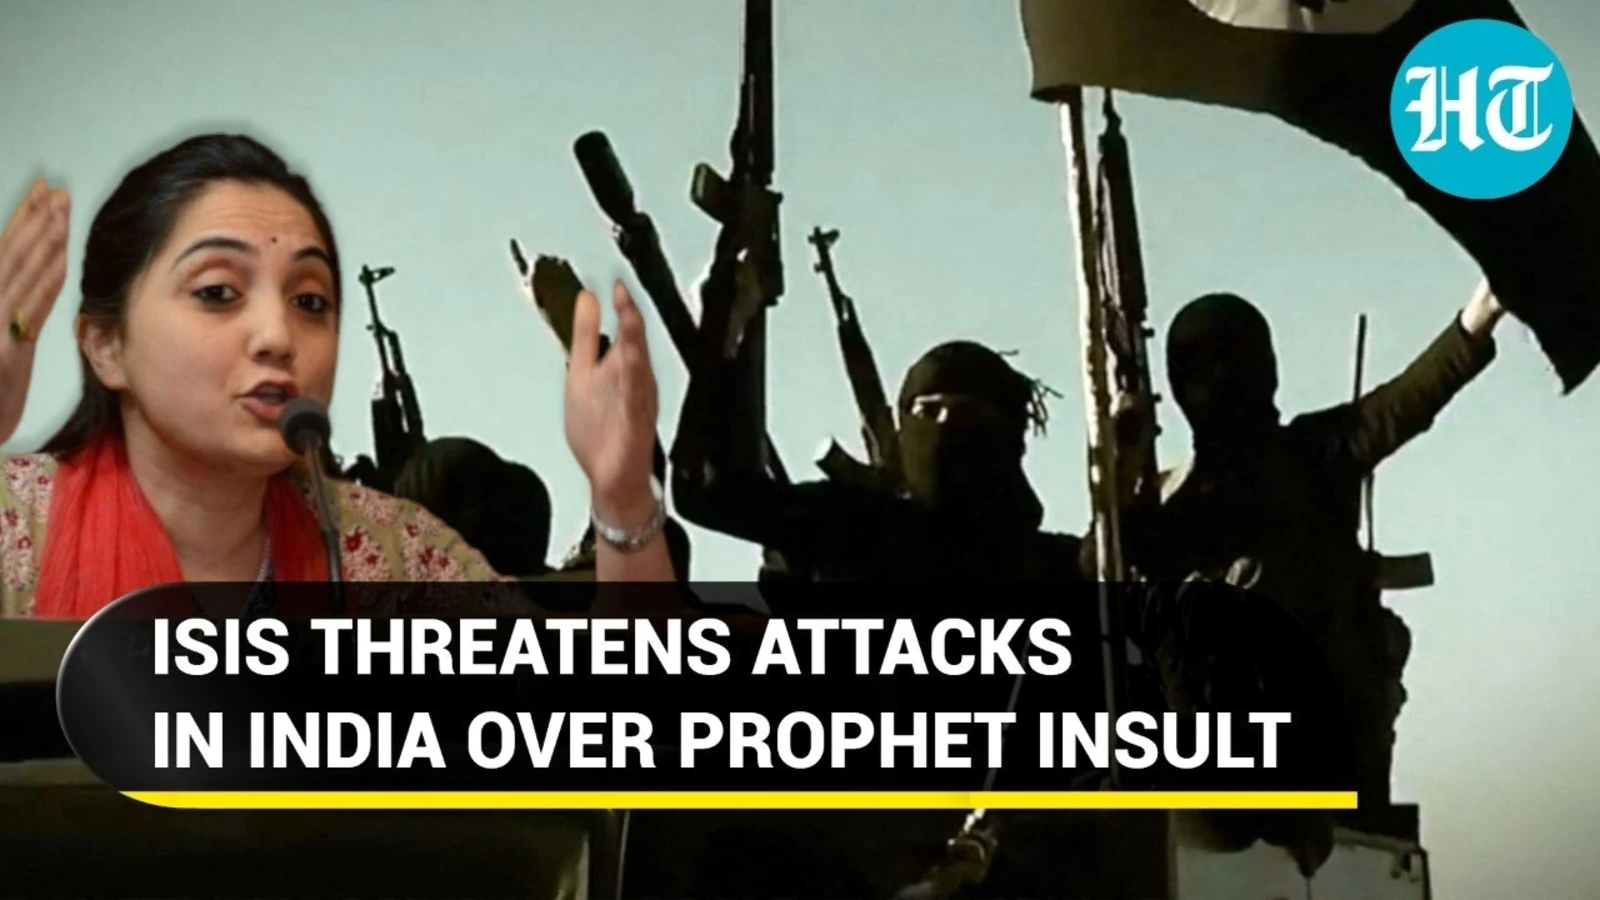 ISIS video featuring Nupur Sharma threatens attacks in India over Prophet insult